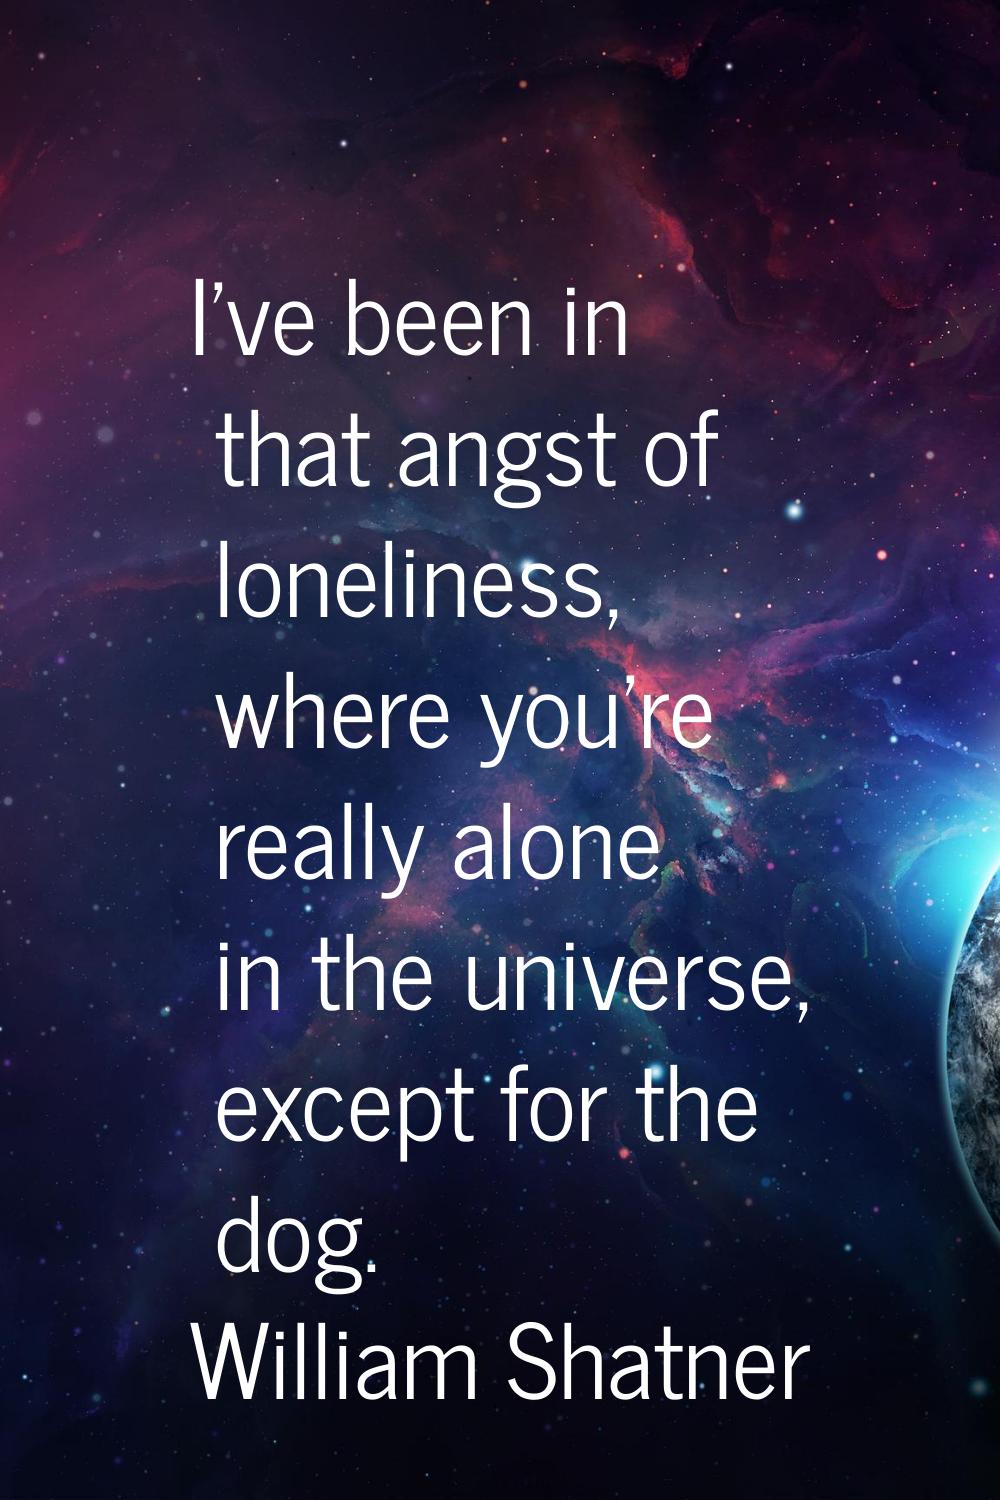 I've been in that angst of loneliness, where you're really alone in the universe, except for the do